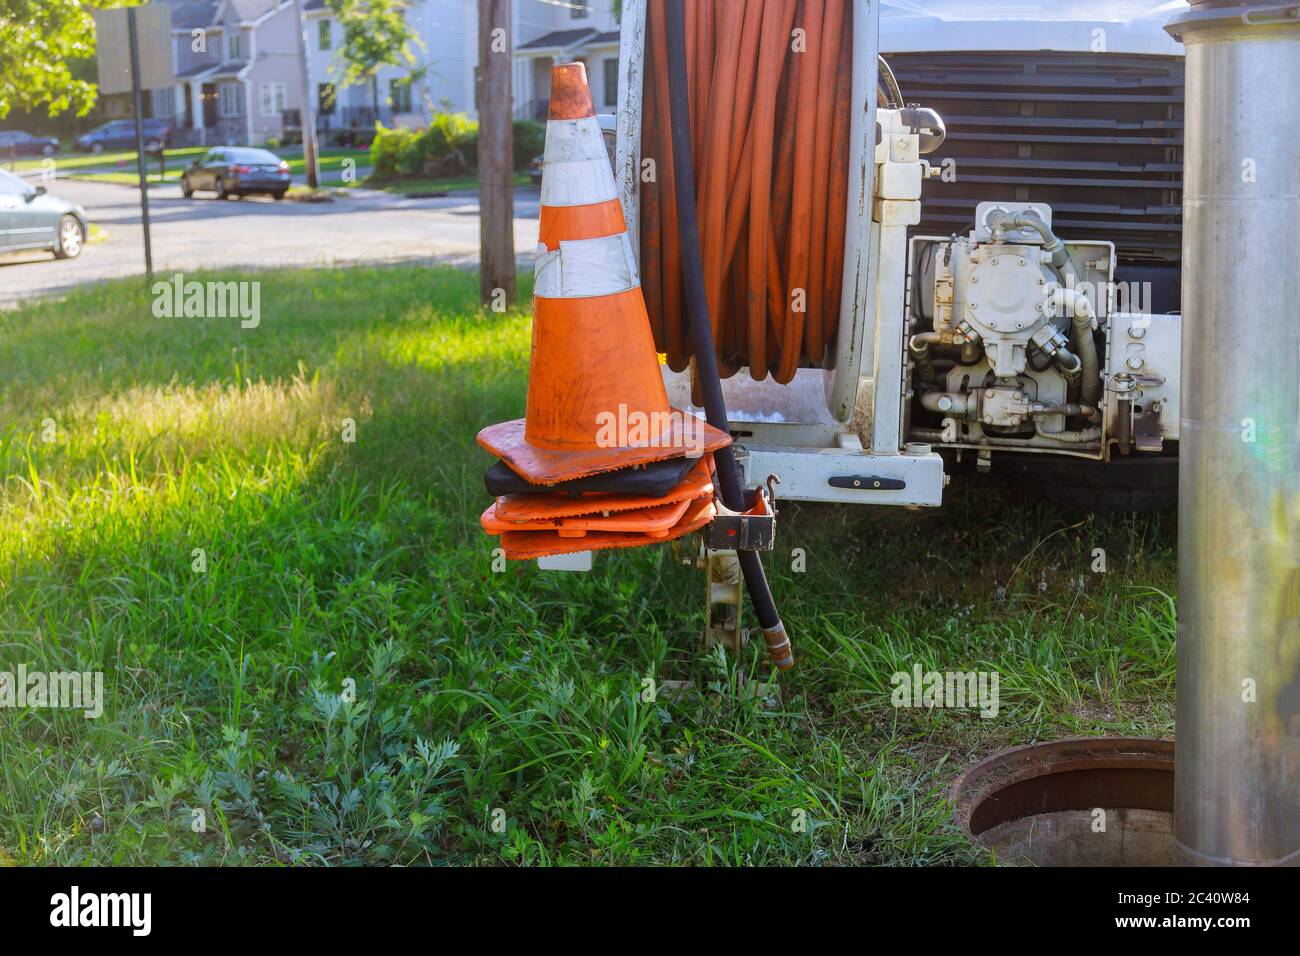 Machine for for cleaning blocked drains sewer wells in the a town street. Stock Photo